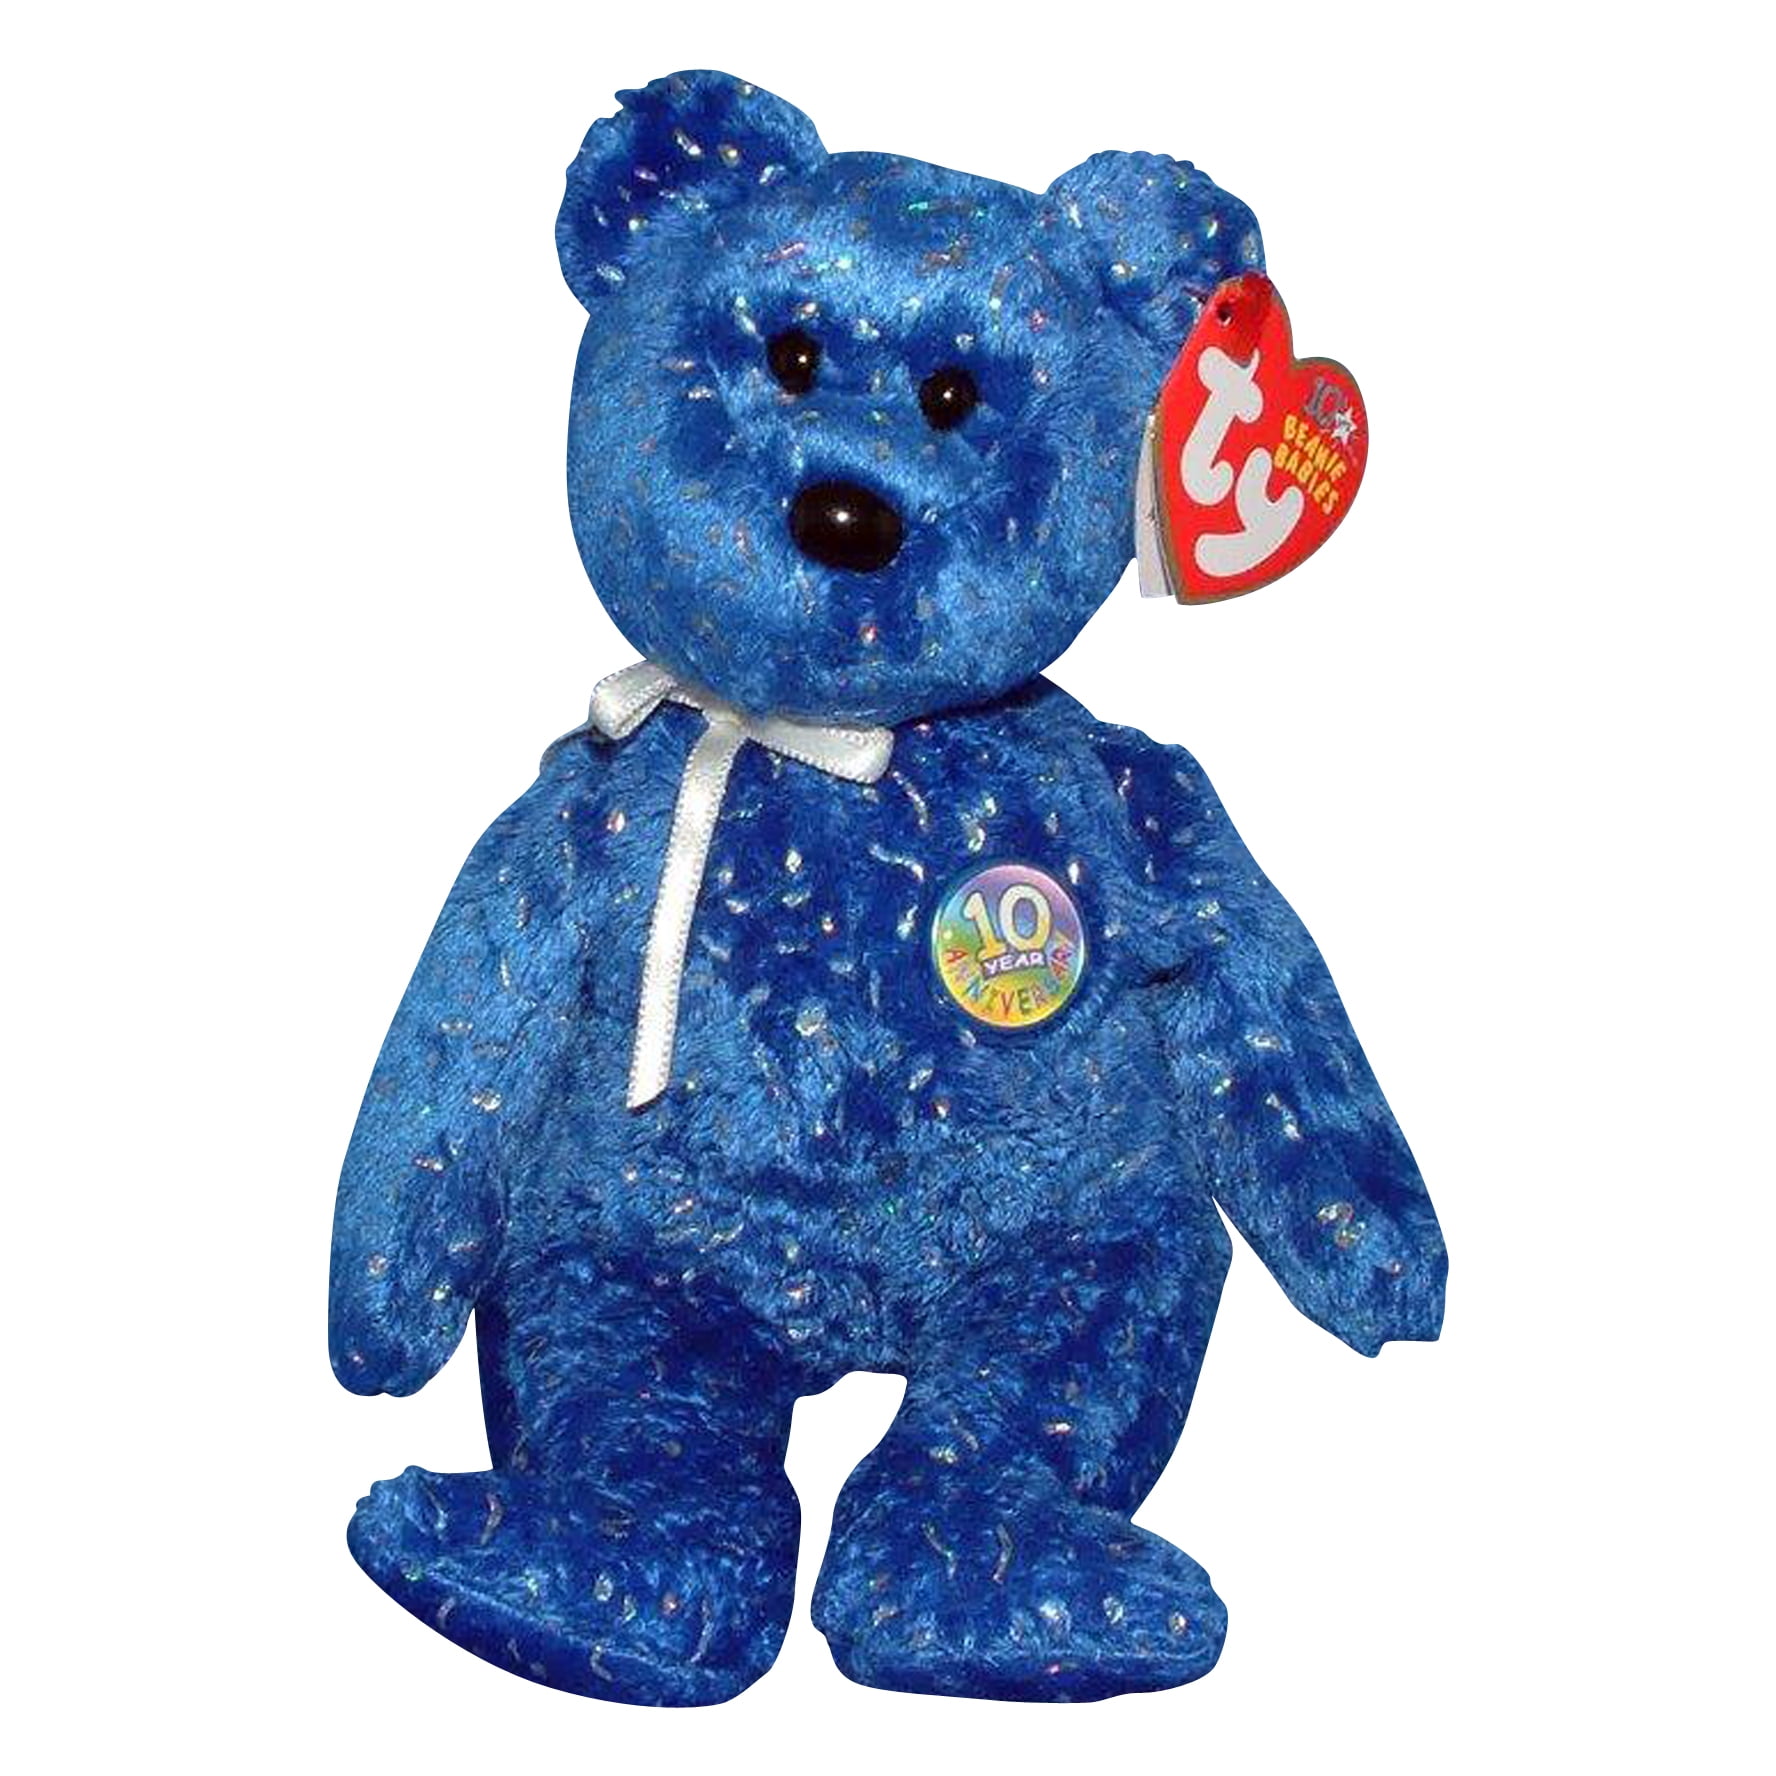 FREE Shipping MWMT Ty Beanie Baby Decade The Light Blue Version 10 Year Bear 